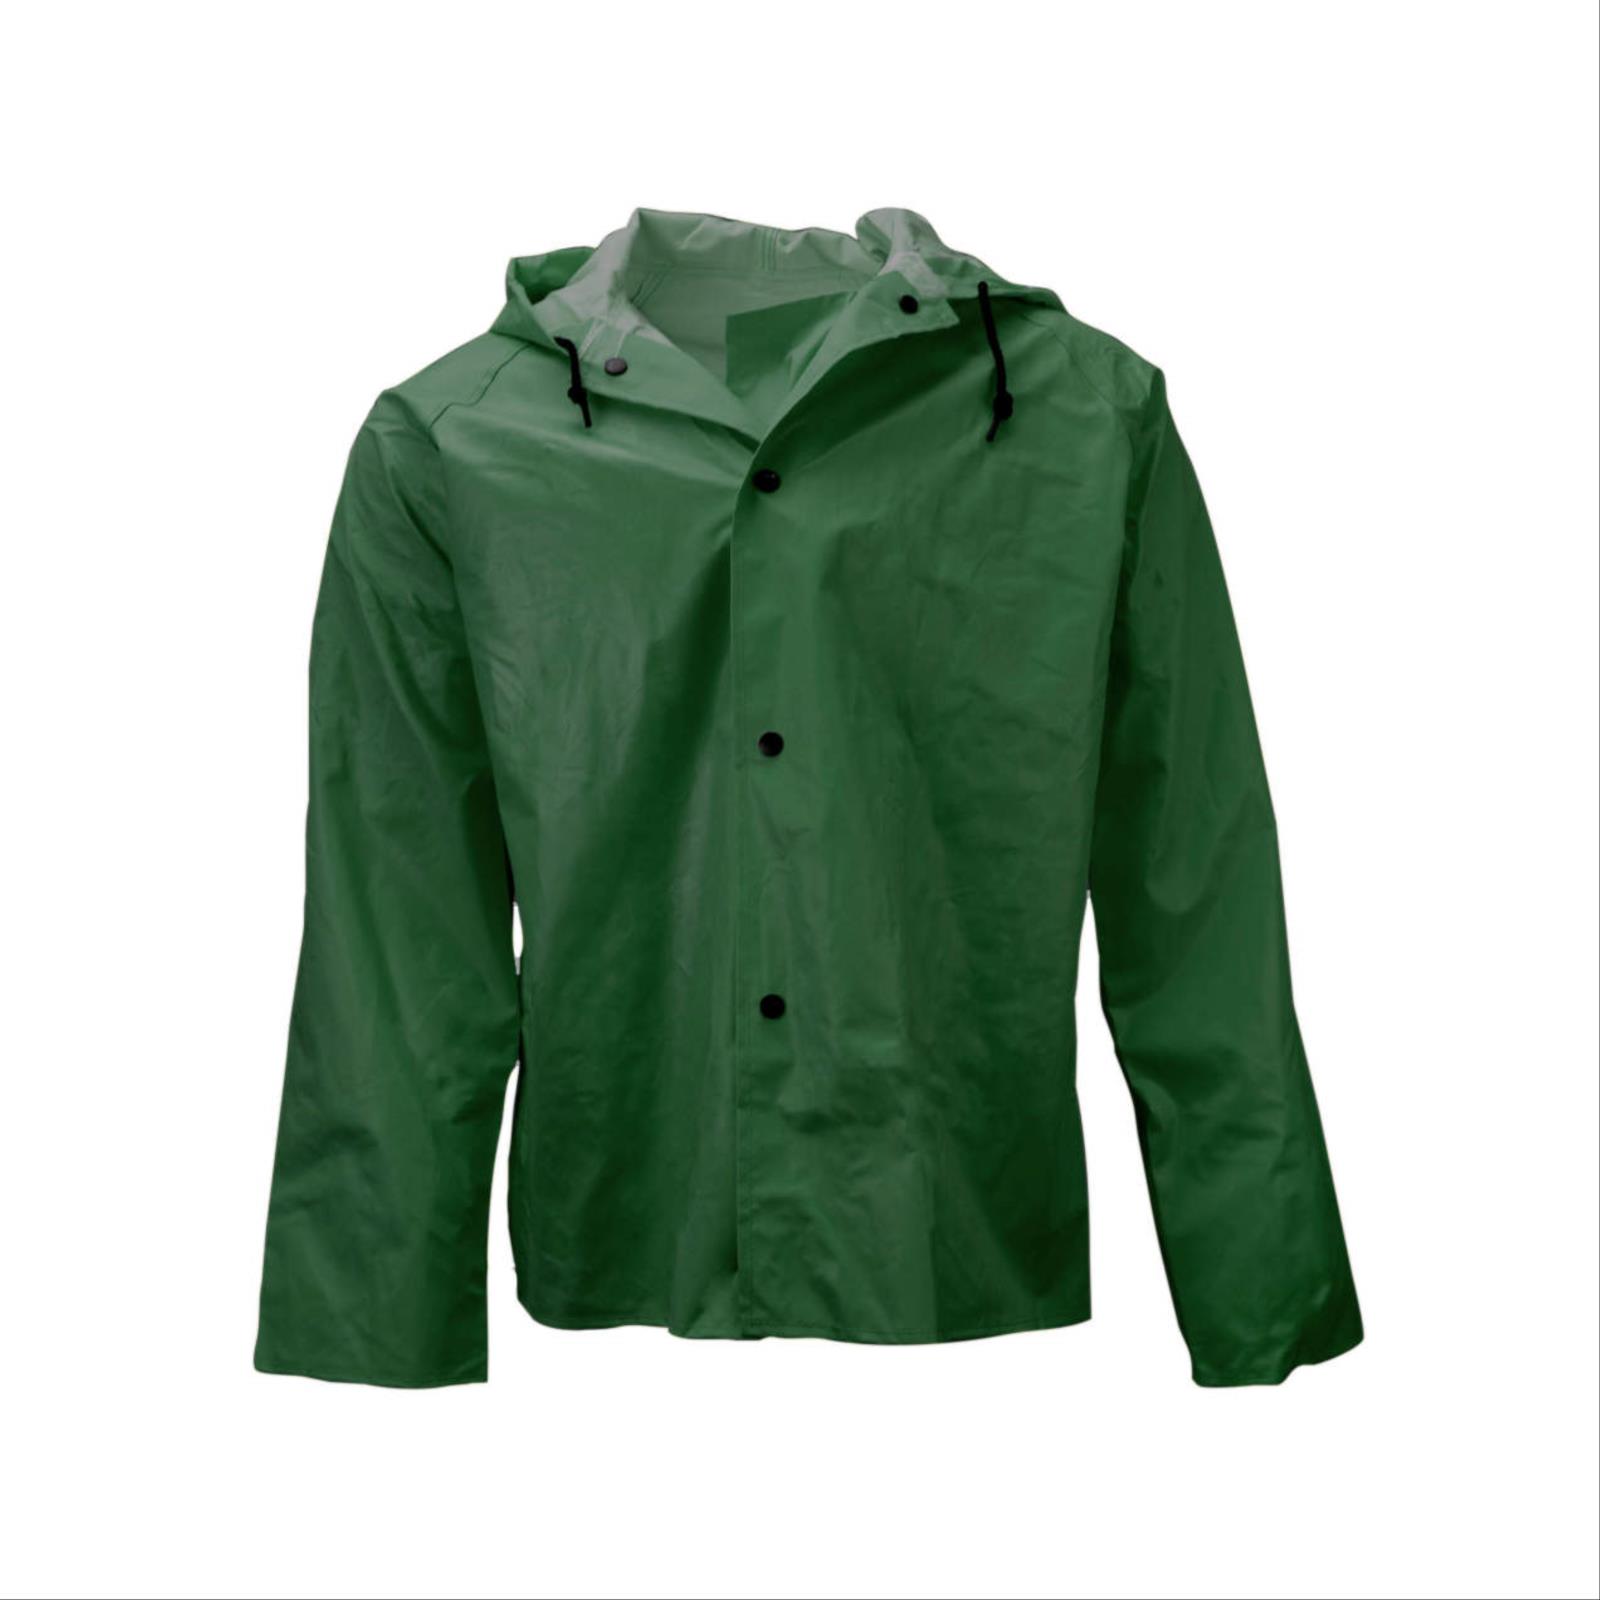 Neese™ Magnum 45 Series Jacket and Bib Overall, Green